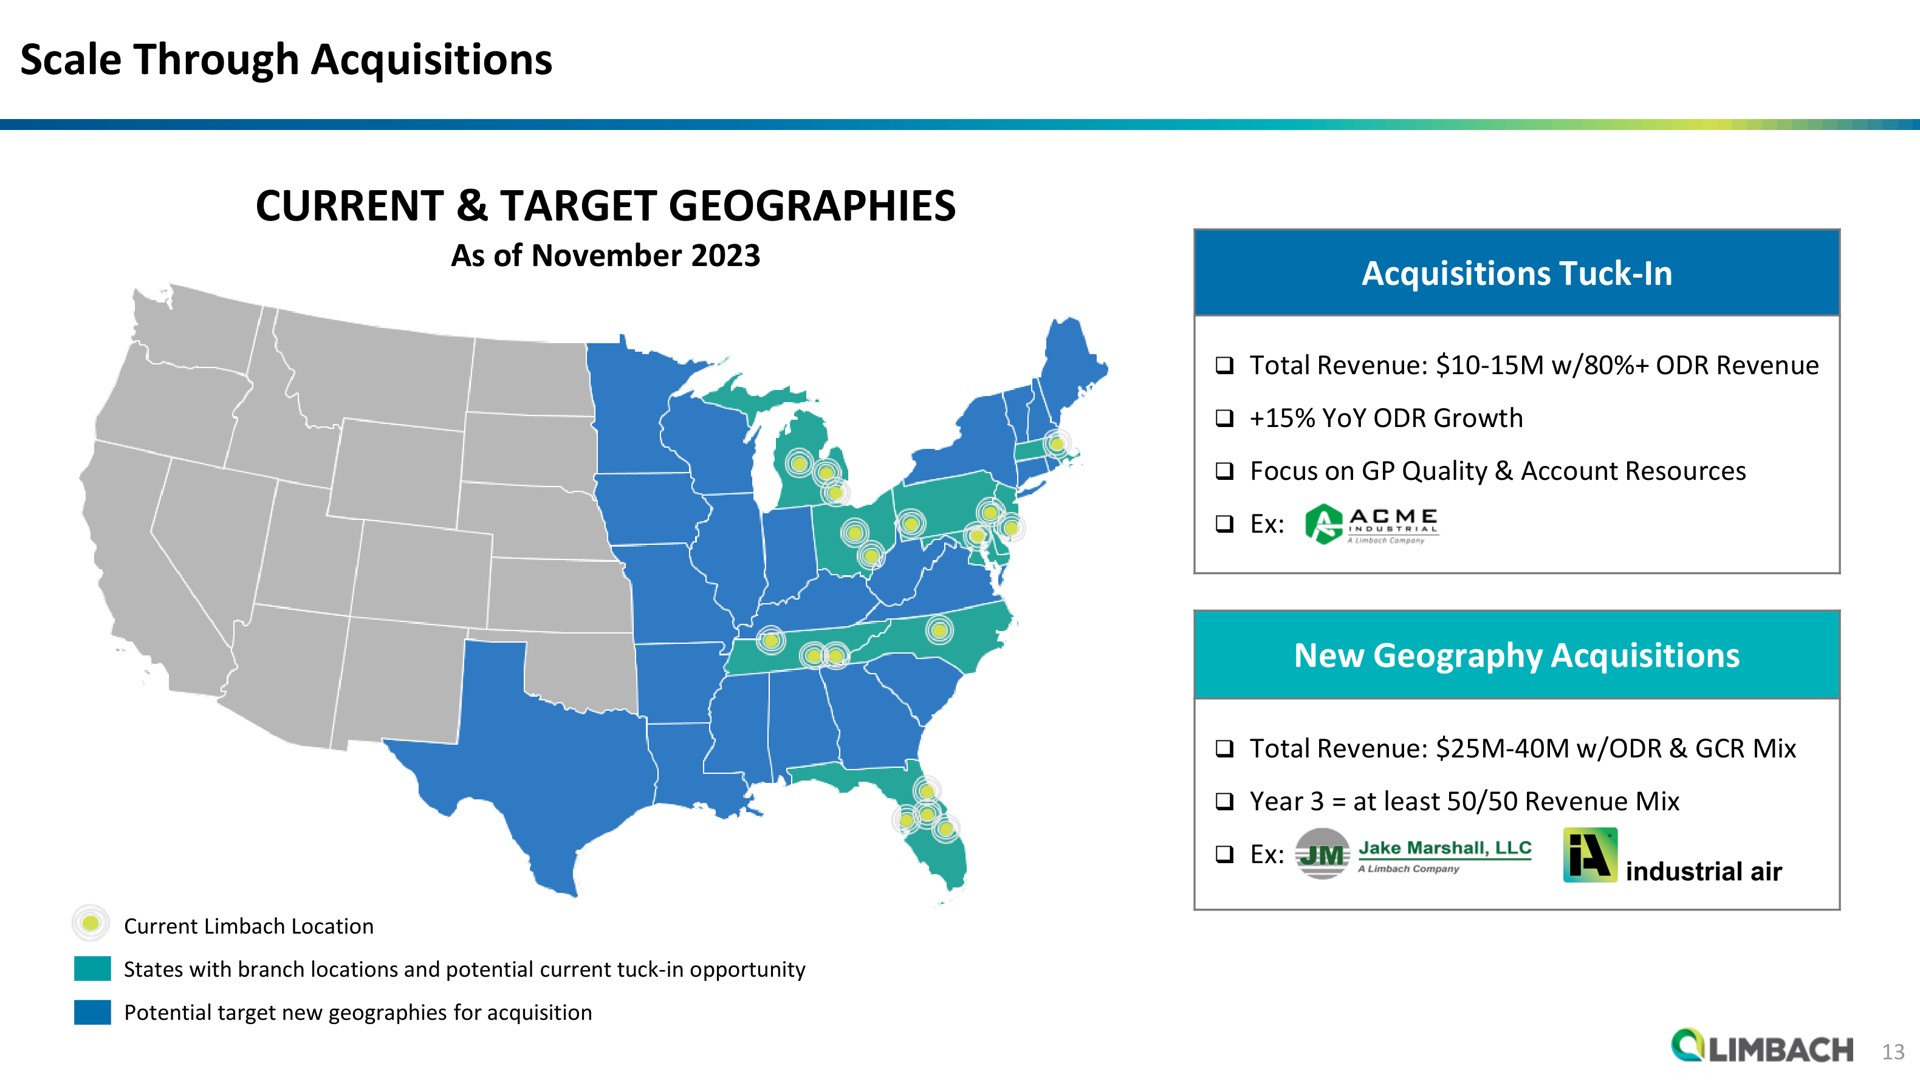 scale through acquisitions current target geographies acquisitions tuck in new geography acquisitions | Limbach Holdings